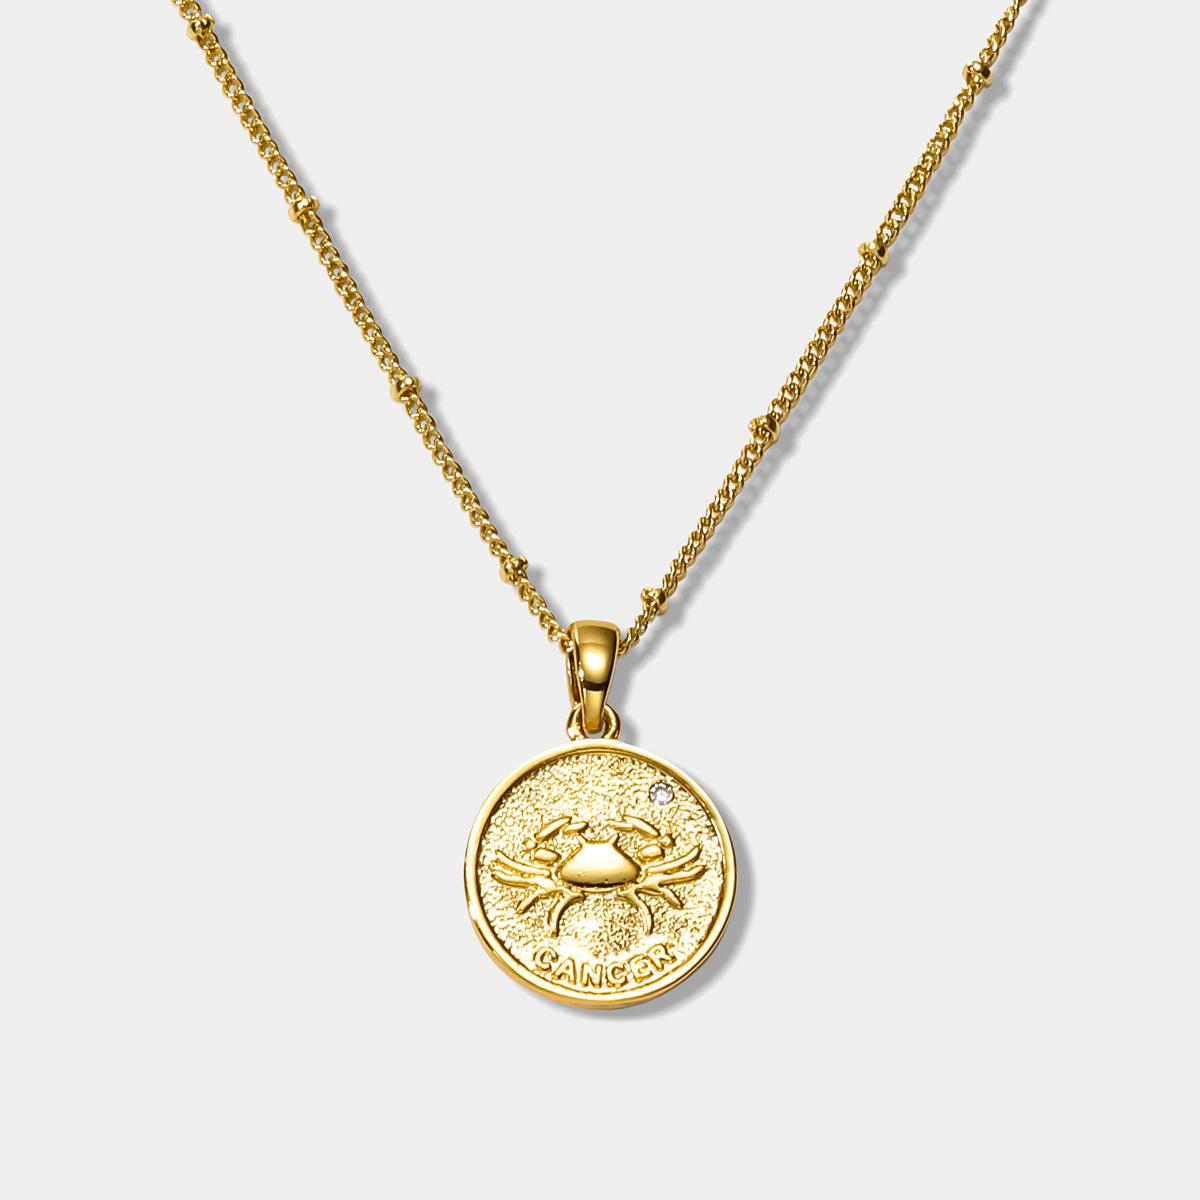 Cancer Constellation Coin Pendant Necklace